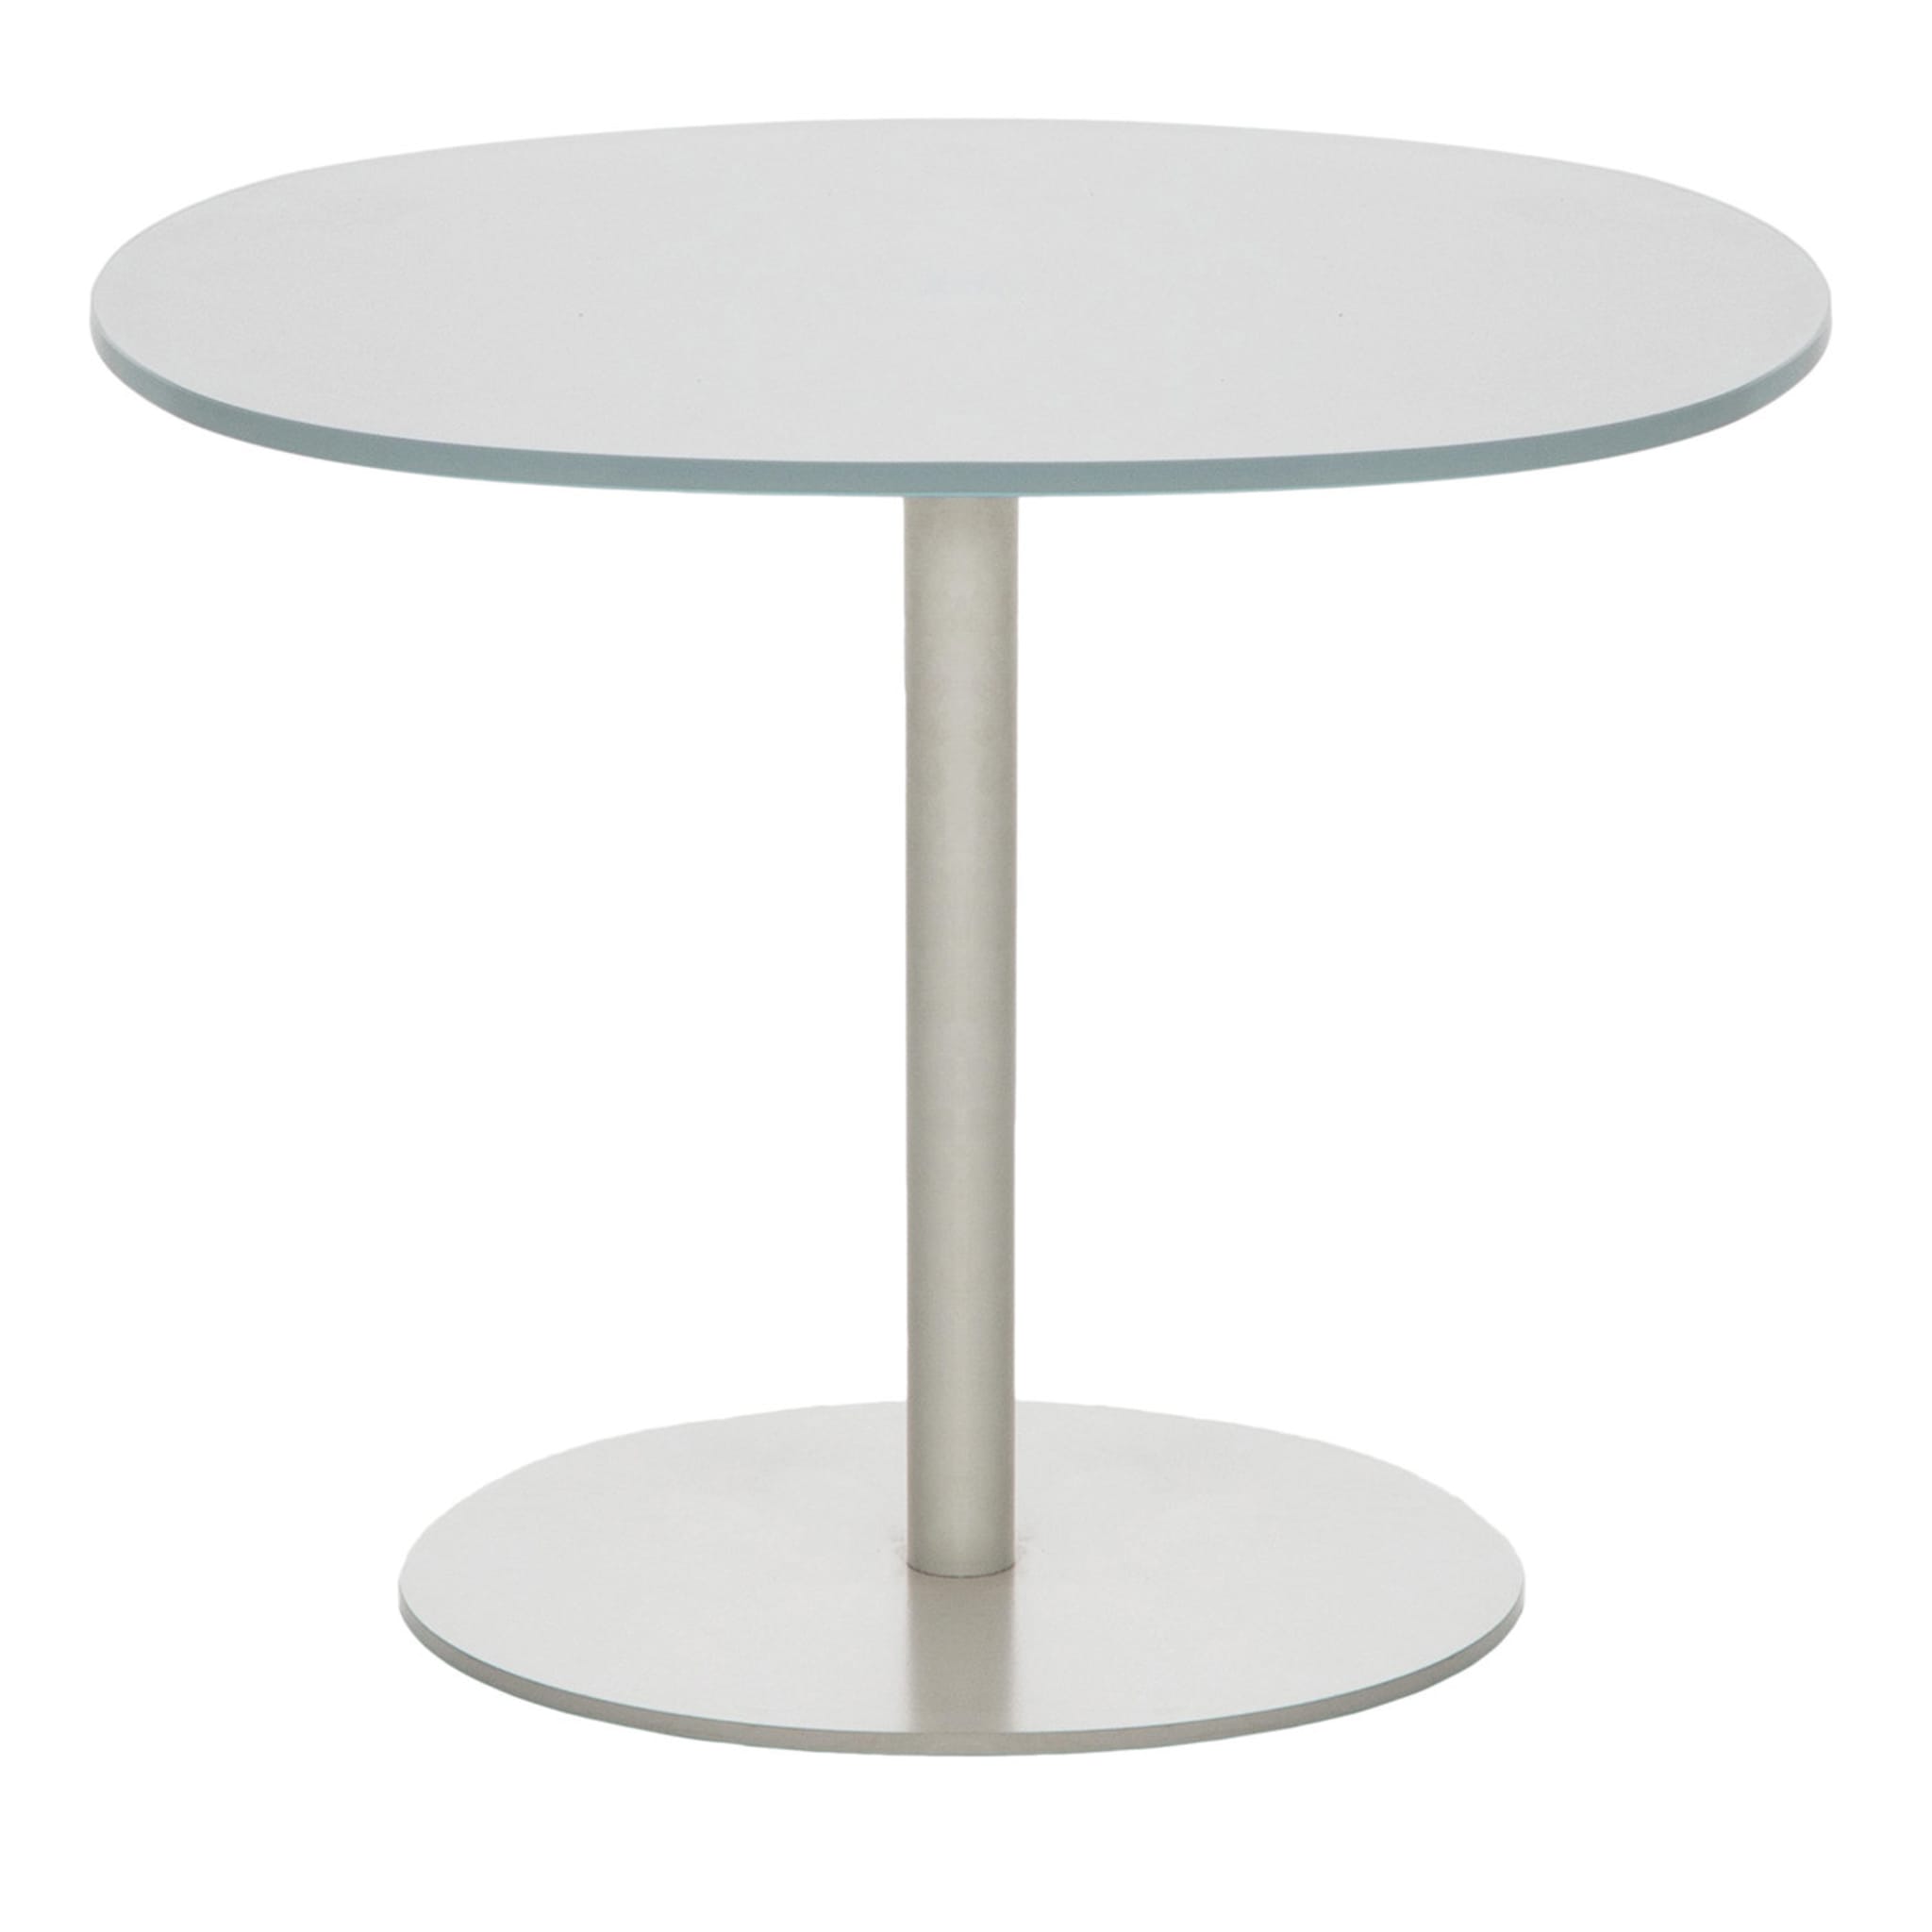 Solenoide White Low Side Table by Piero Lissoni - Main view